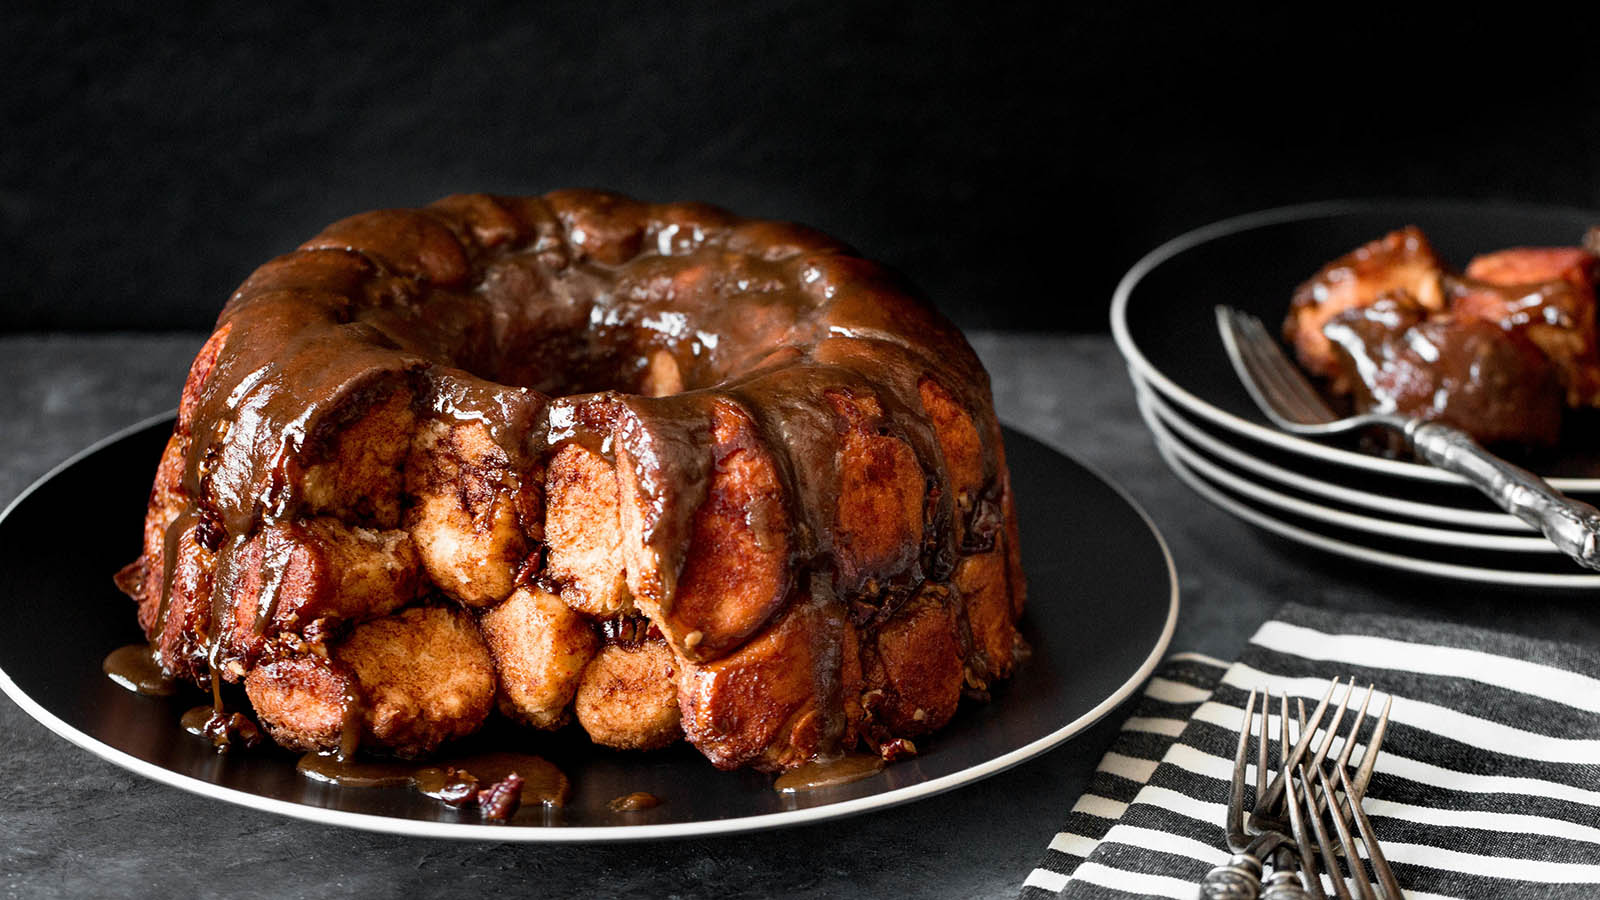 🥞 Sorry, Only Real Foodies Have Eaten at Least 17/24 of These Delicious Brunch Foods Monkey Bread